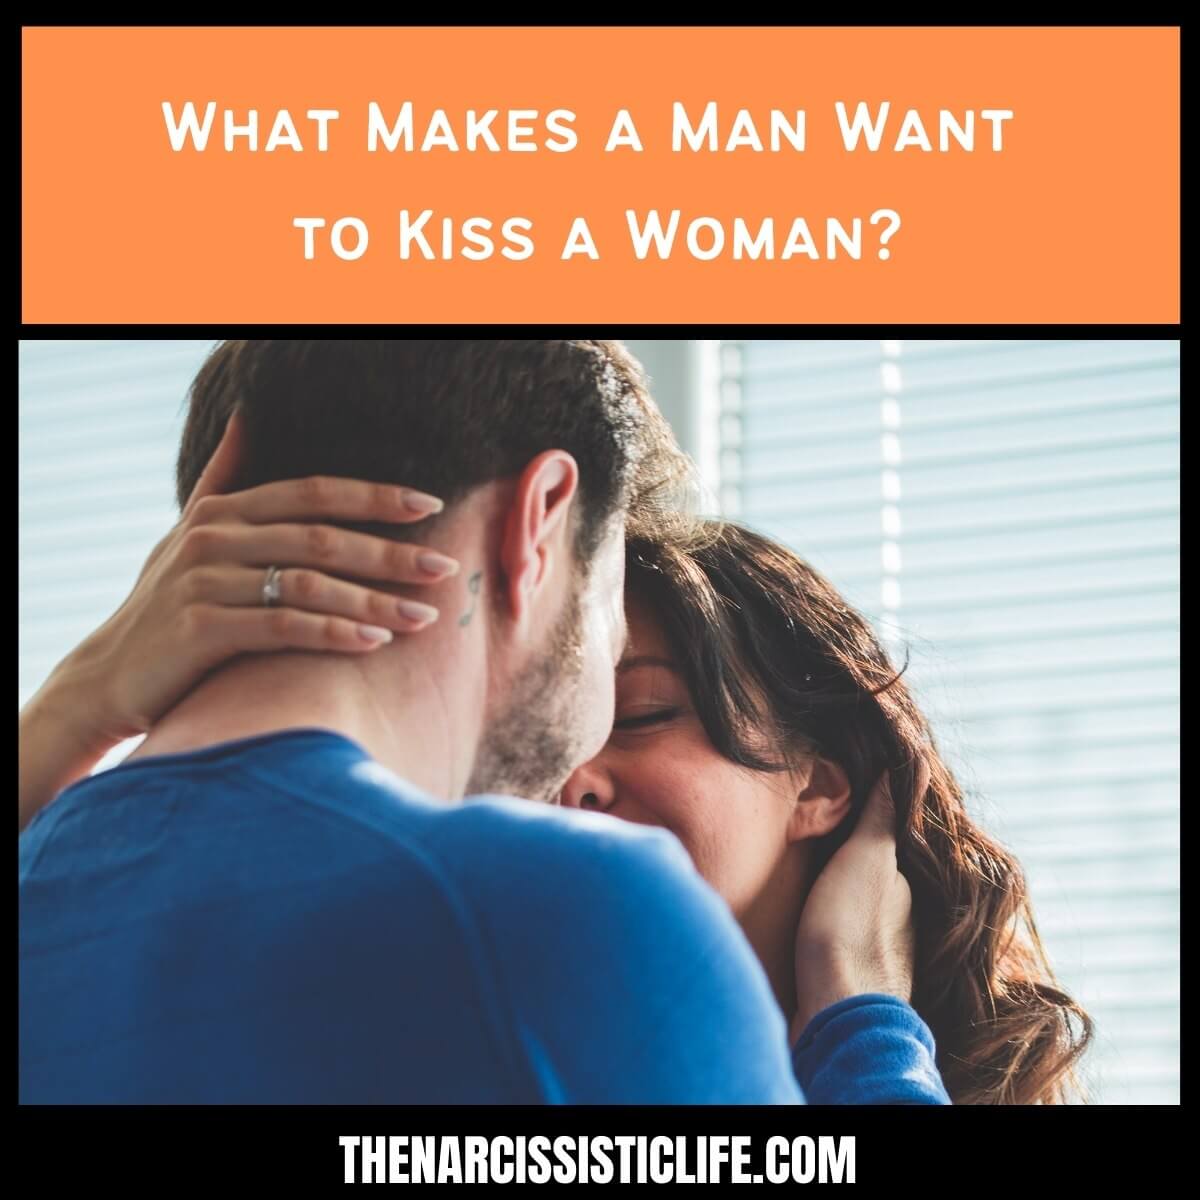 What Makes a Man Want to Kiss a Woman